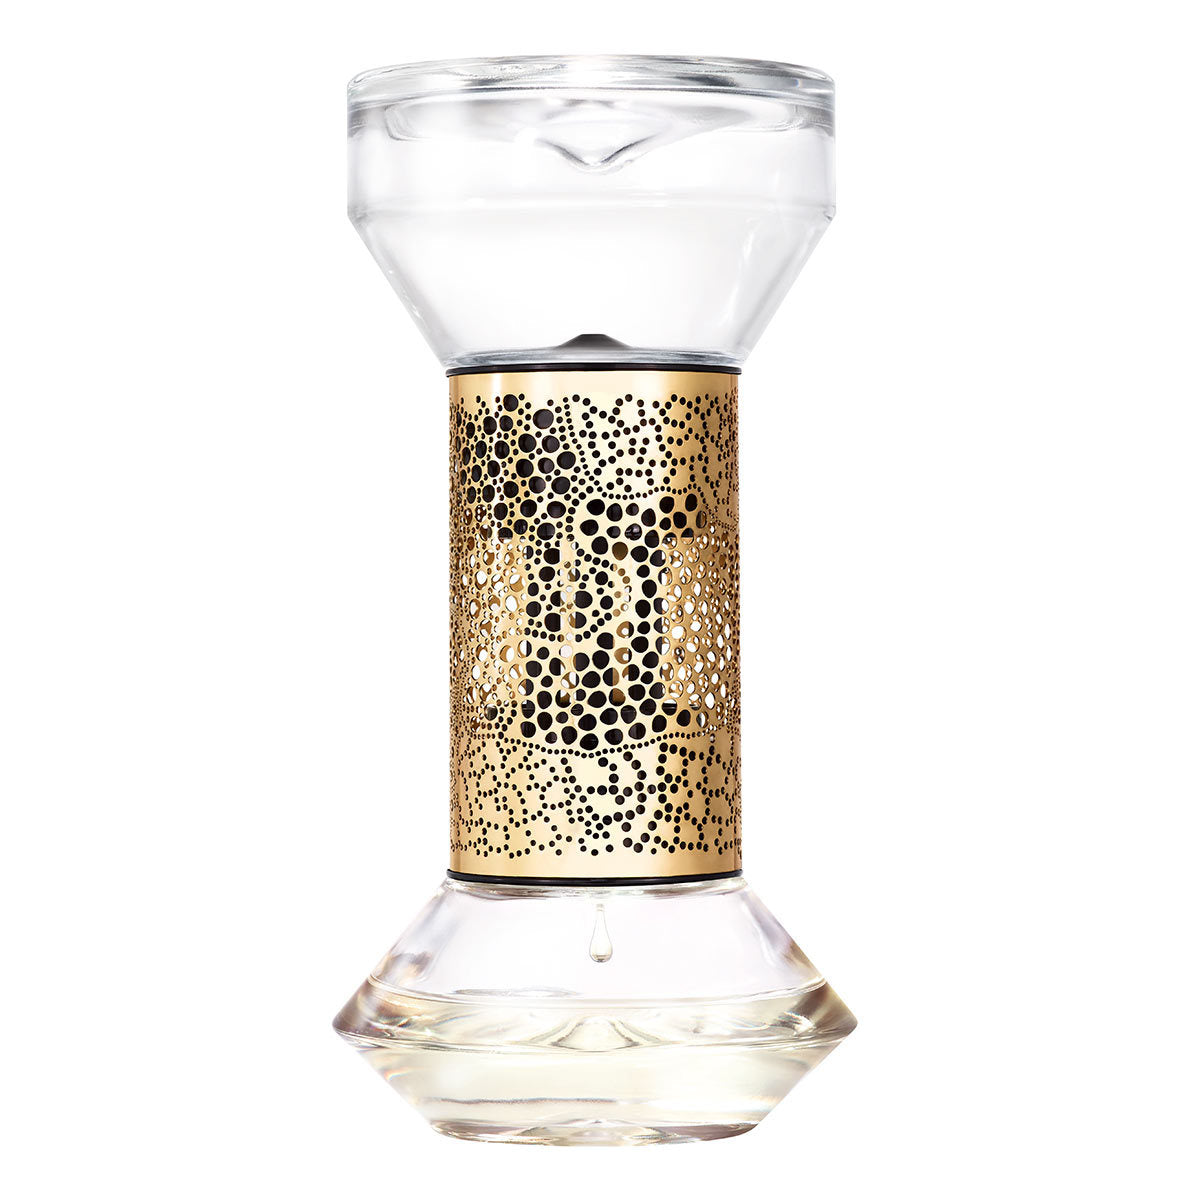 Primary image of Roses Hourglass Diffuser